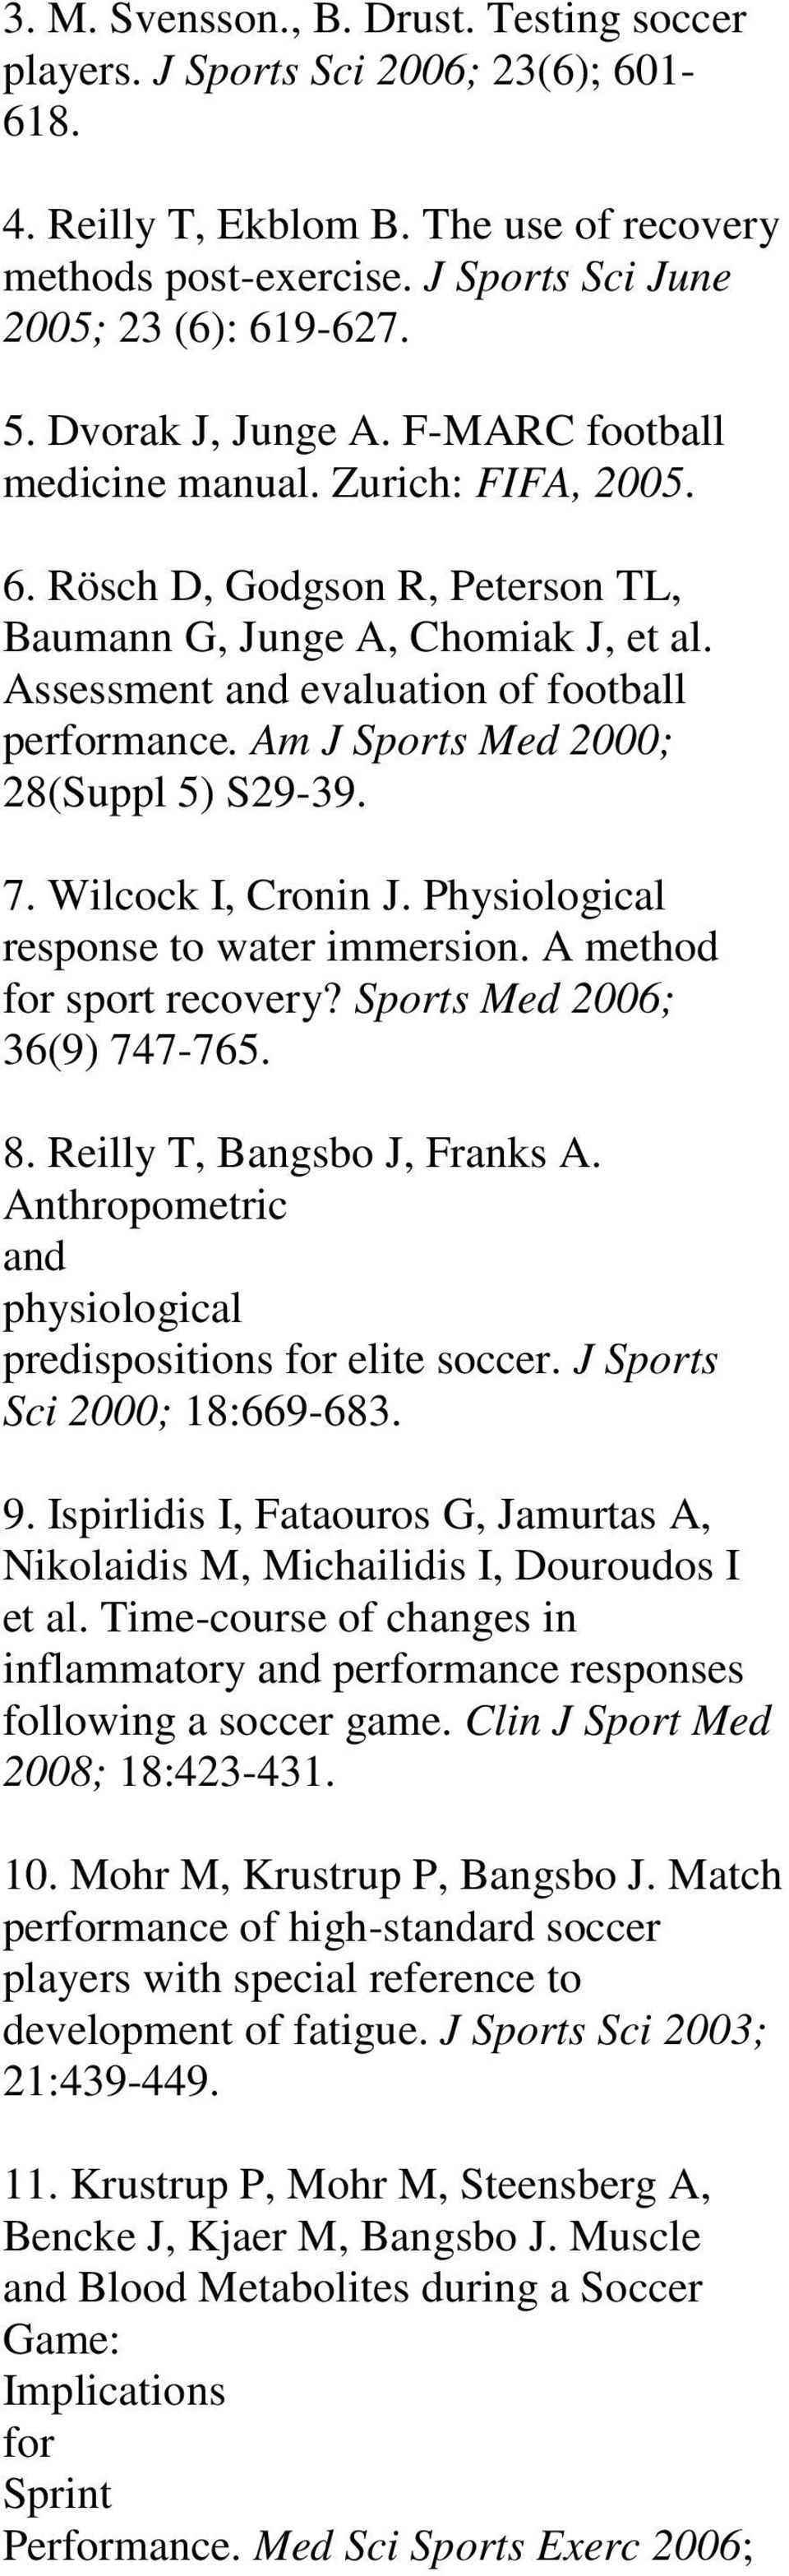 Am J Sports Med 2000; 28(Suppl 5) S29-39. 7. Wilcock I, Cronin J. Physiological response to water immersion. A method for sport recovery? Sports Med 2006; 36(9) 747-765. 8.